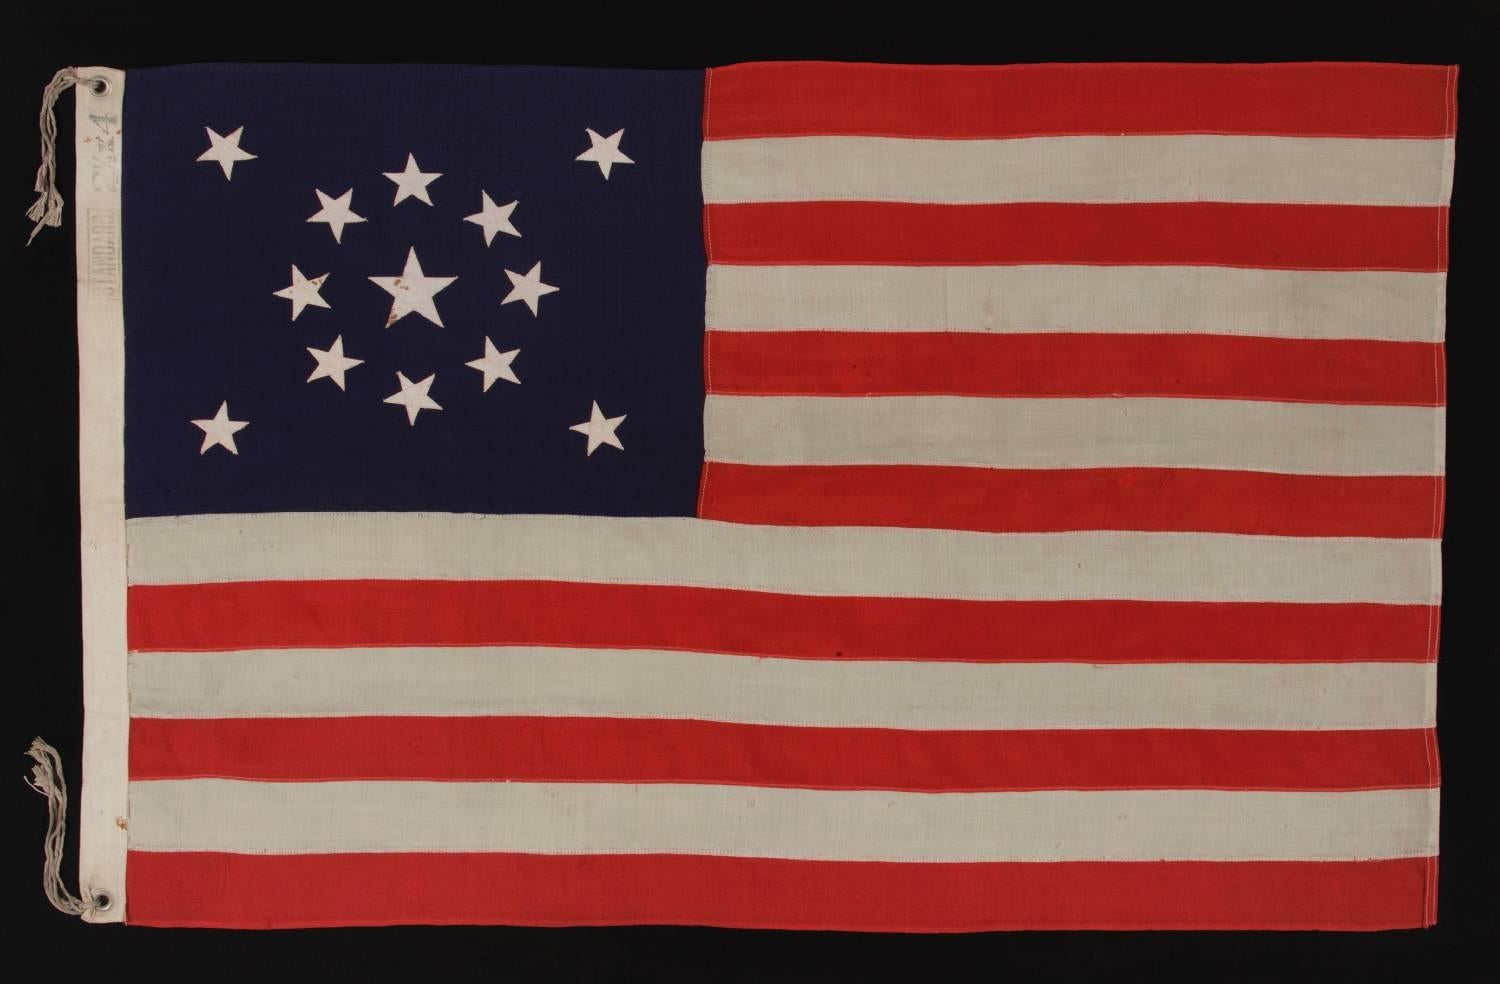 13 stars arranged in a medallion pattern on a small-scale flag of the 1895-1926 era:

 13 star flag of the type made from roughly the last decade of the 19th century through the first quarter of the 20th century. The stars are arranged in a